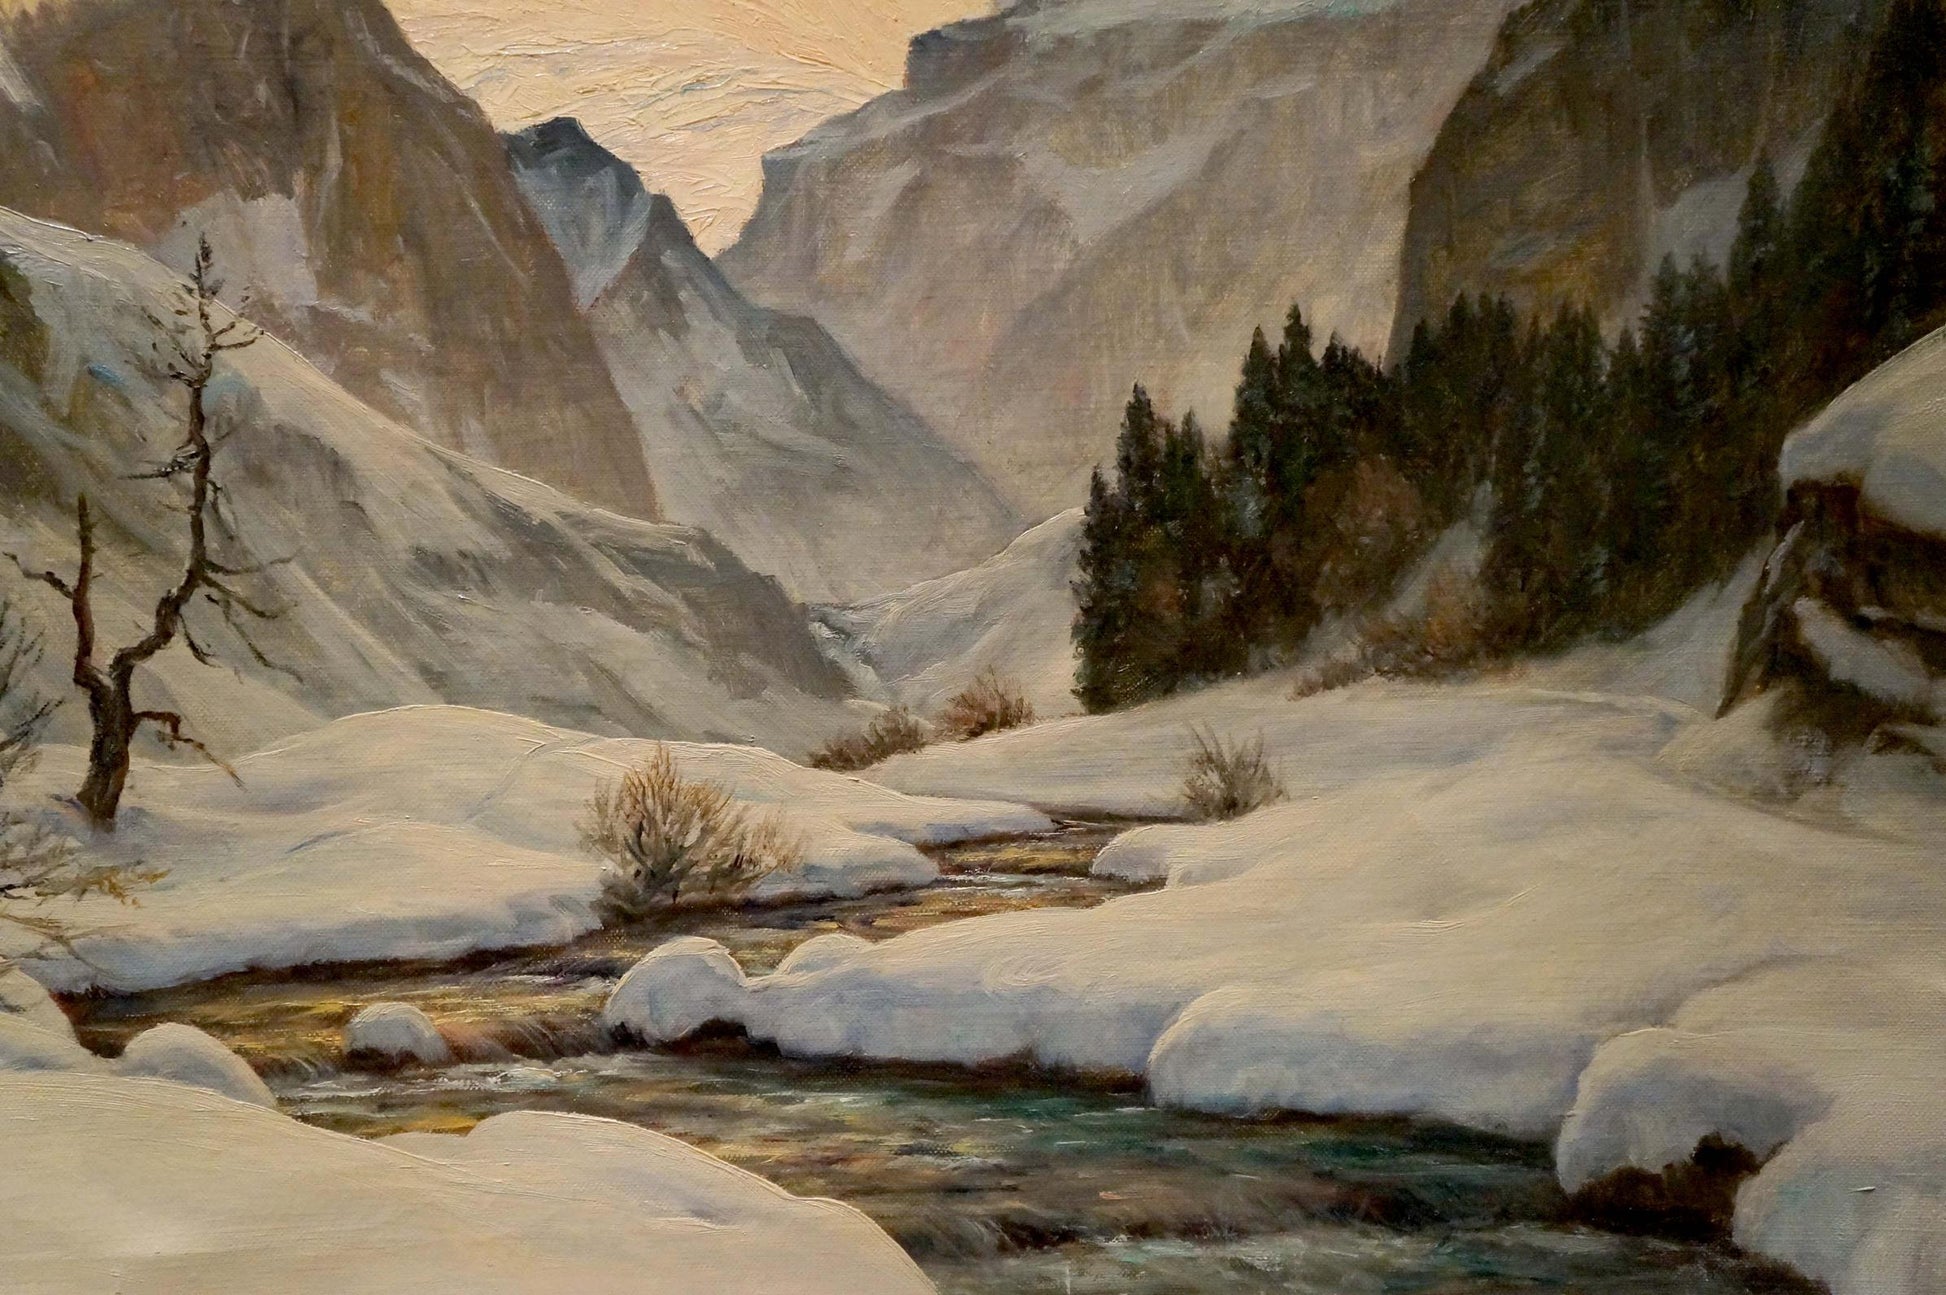 Frosty Tranquility - an oil painting by Erwin Kettemann